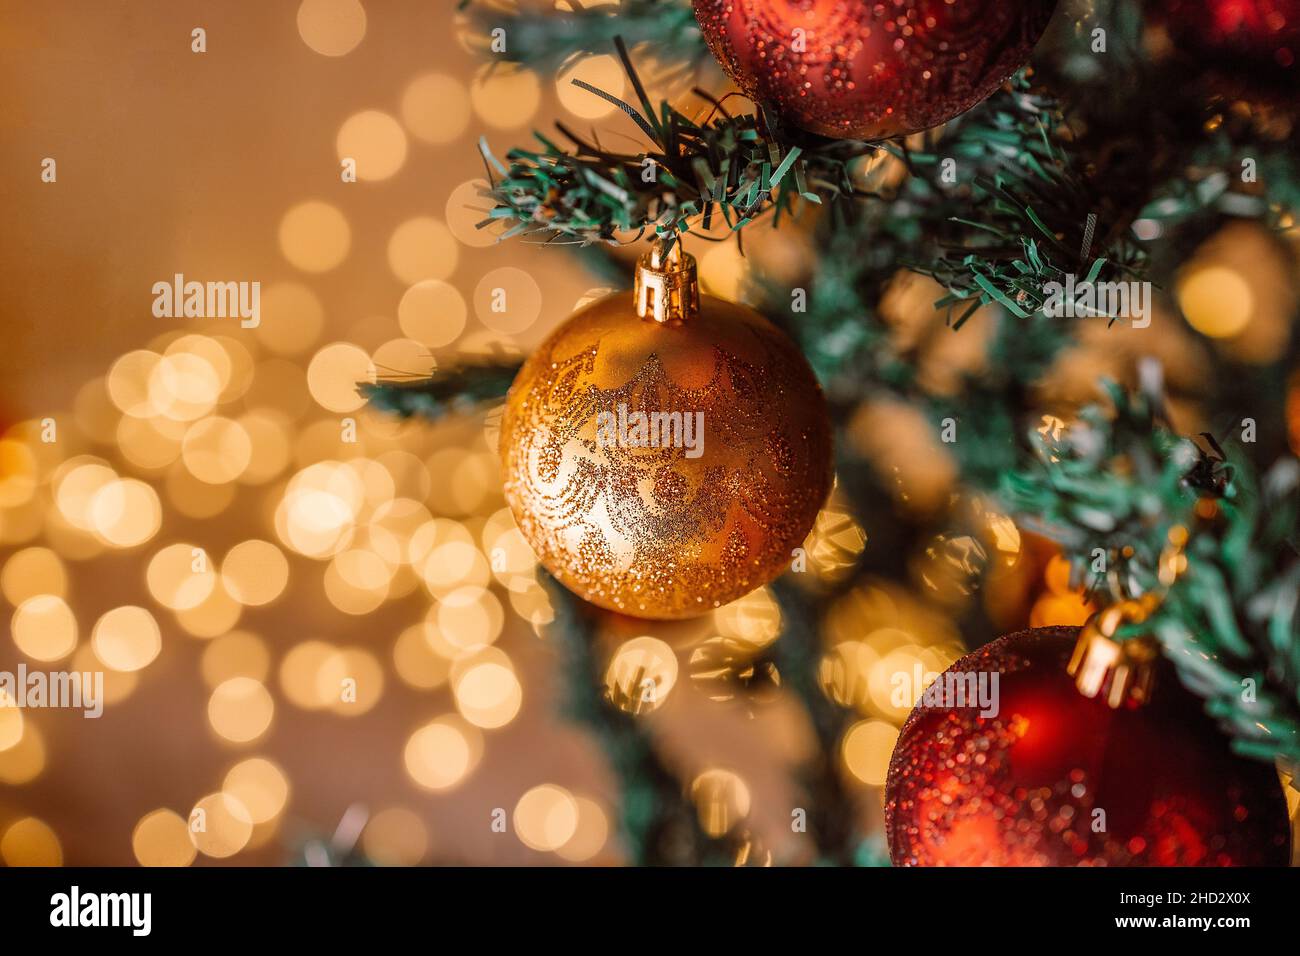 Christmas 2022 Themes Happy New Year 2022 Theme With Xmas Red And Gold Balls Decoration On Christmas Tree Branch Over Beautiful Lights Background. Selective Focus Stock Photo - Alamy